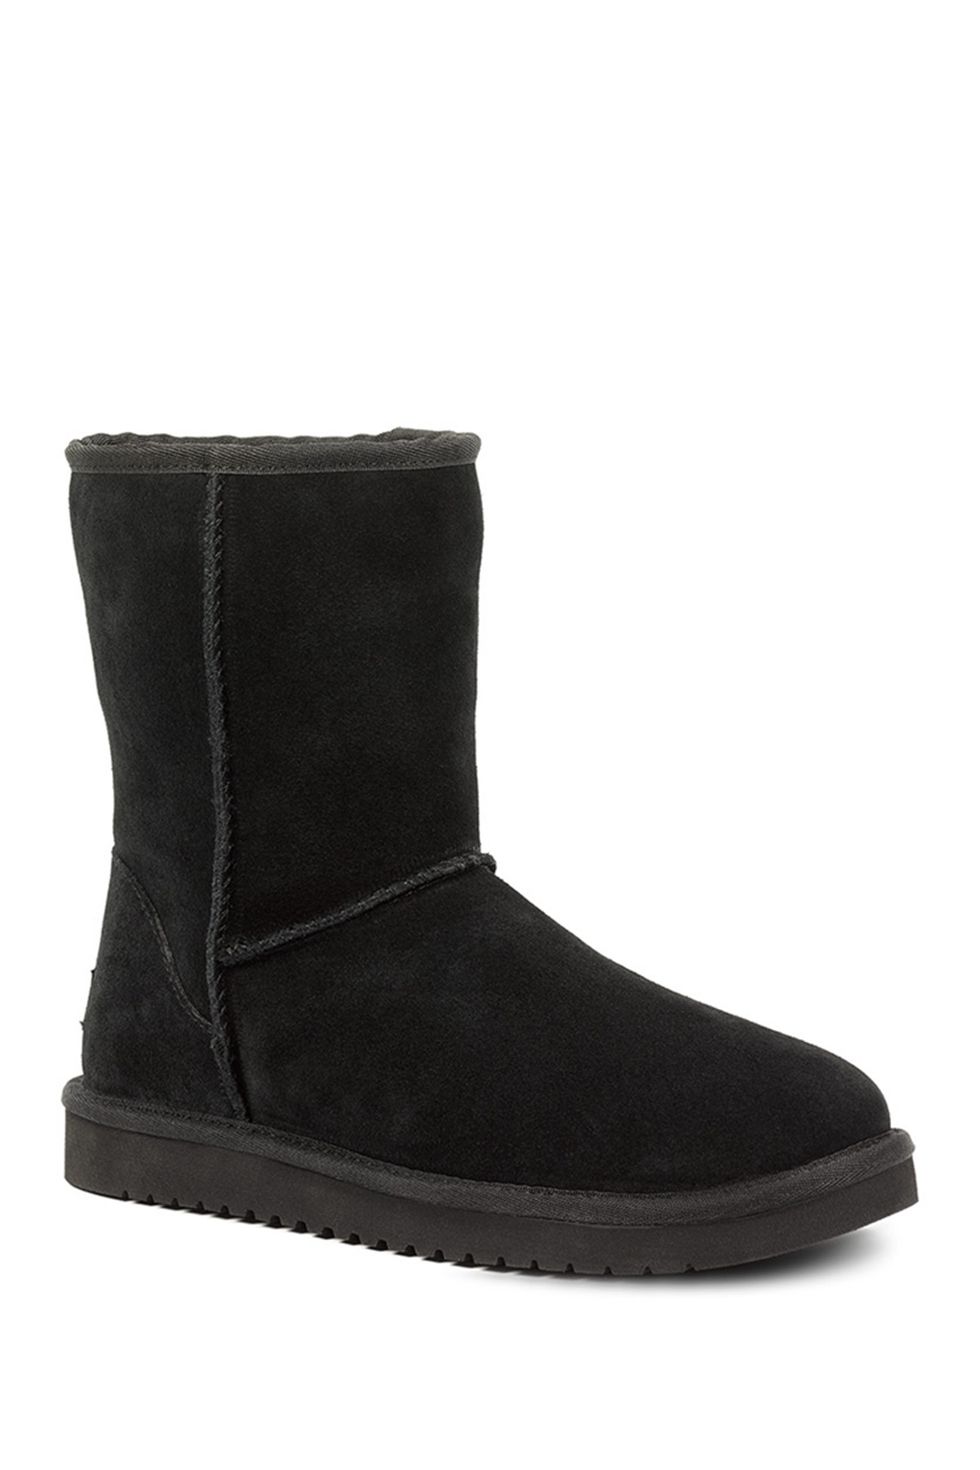 Ugg Boots Are One Sale at Nordstrom Rack - Nordstrom Rack's Taking Up ...